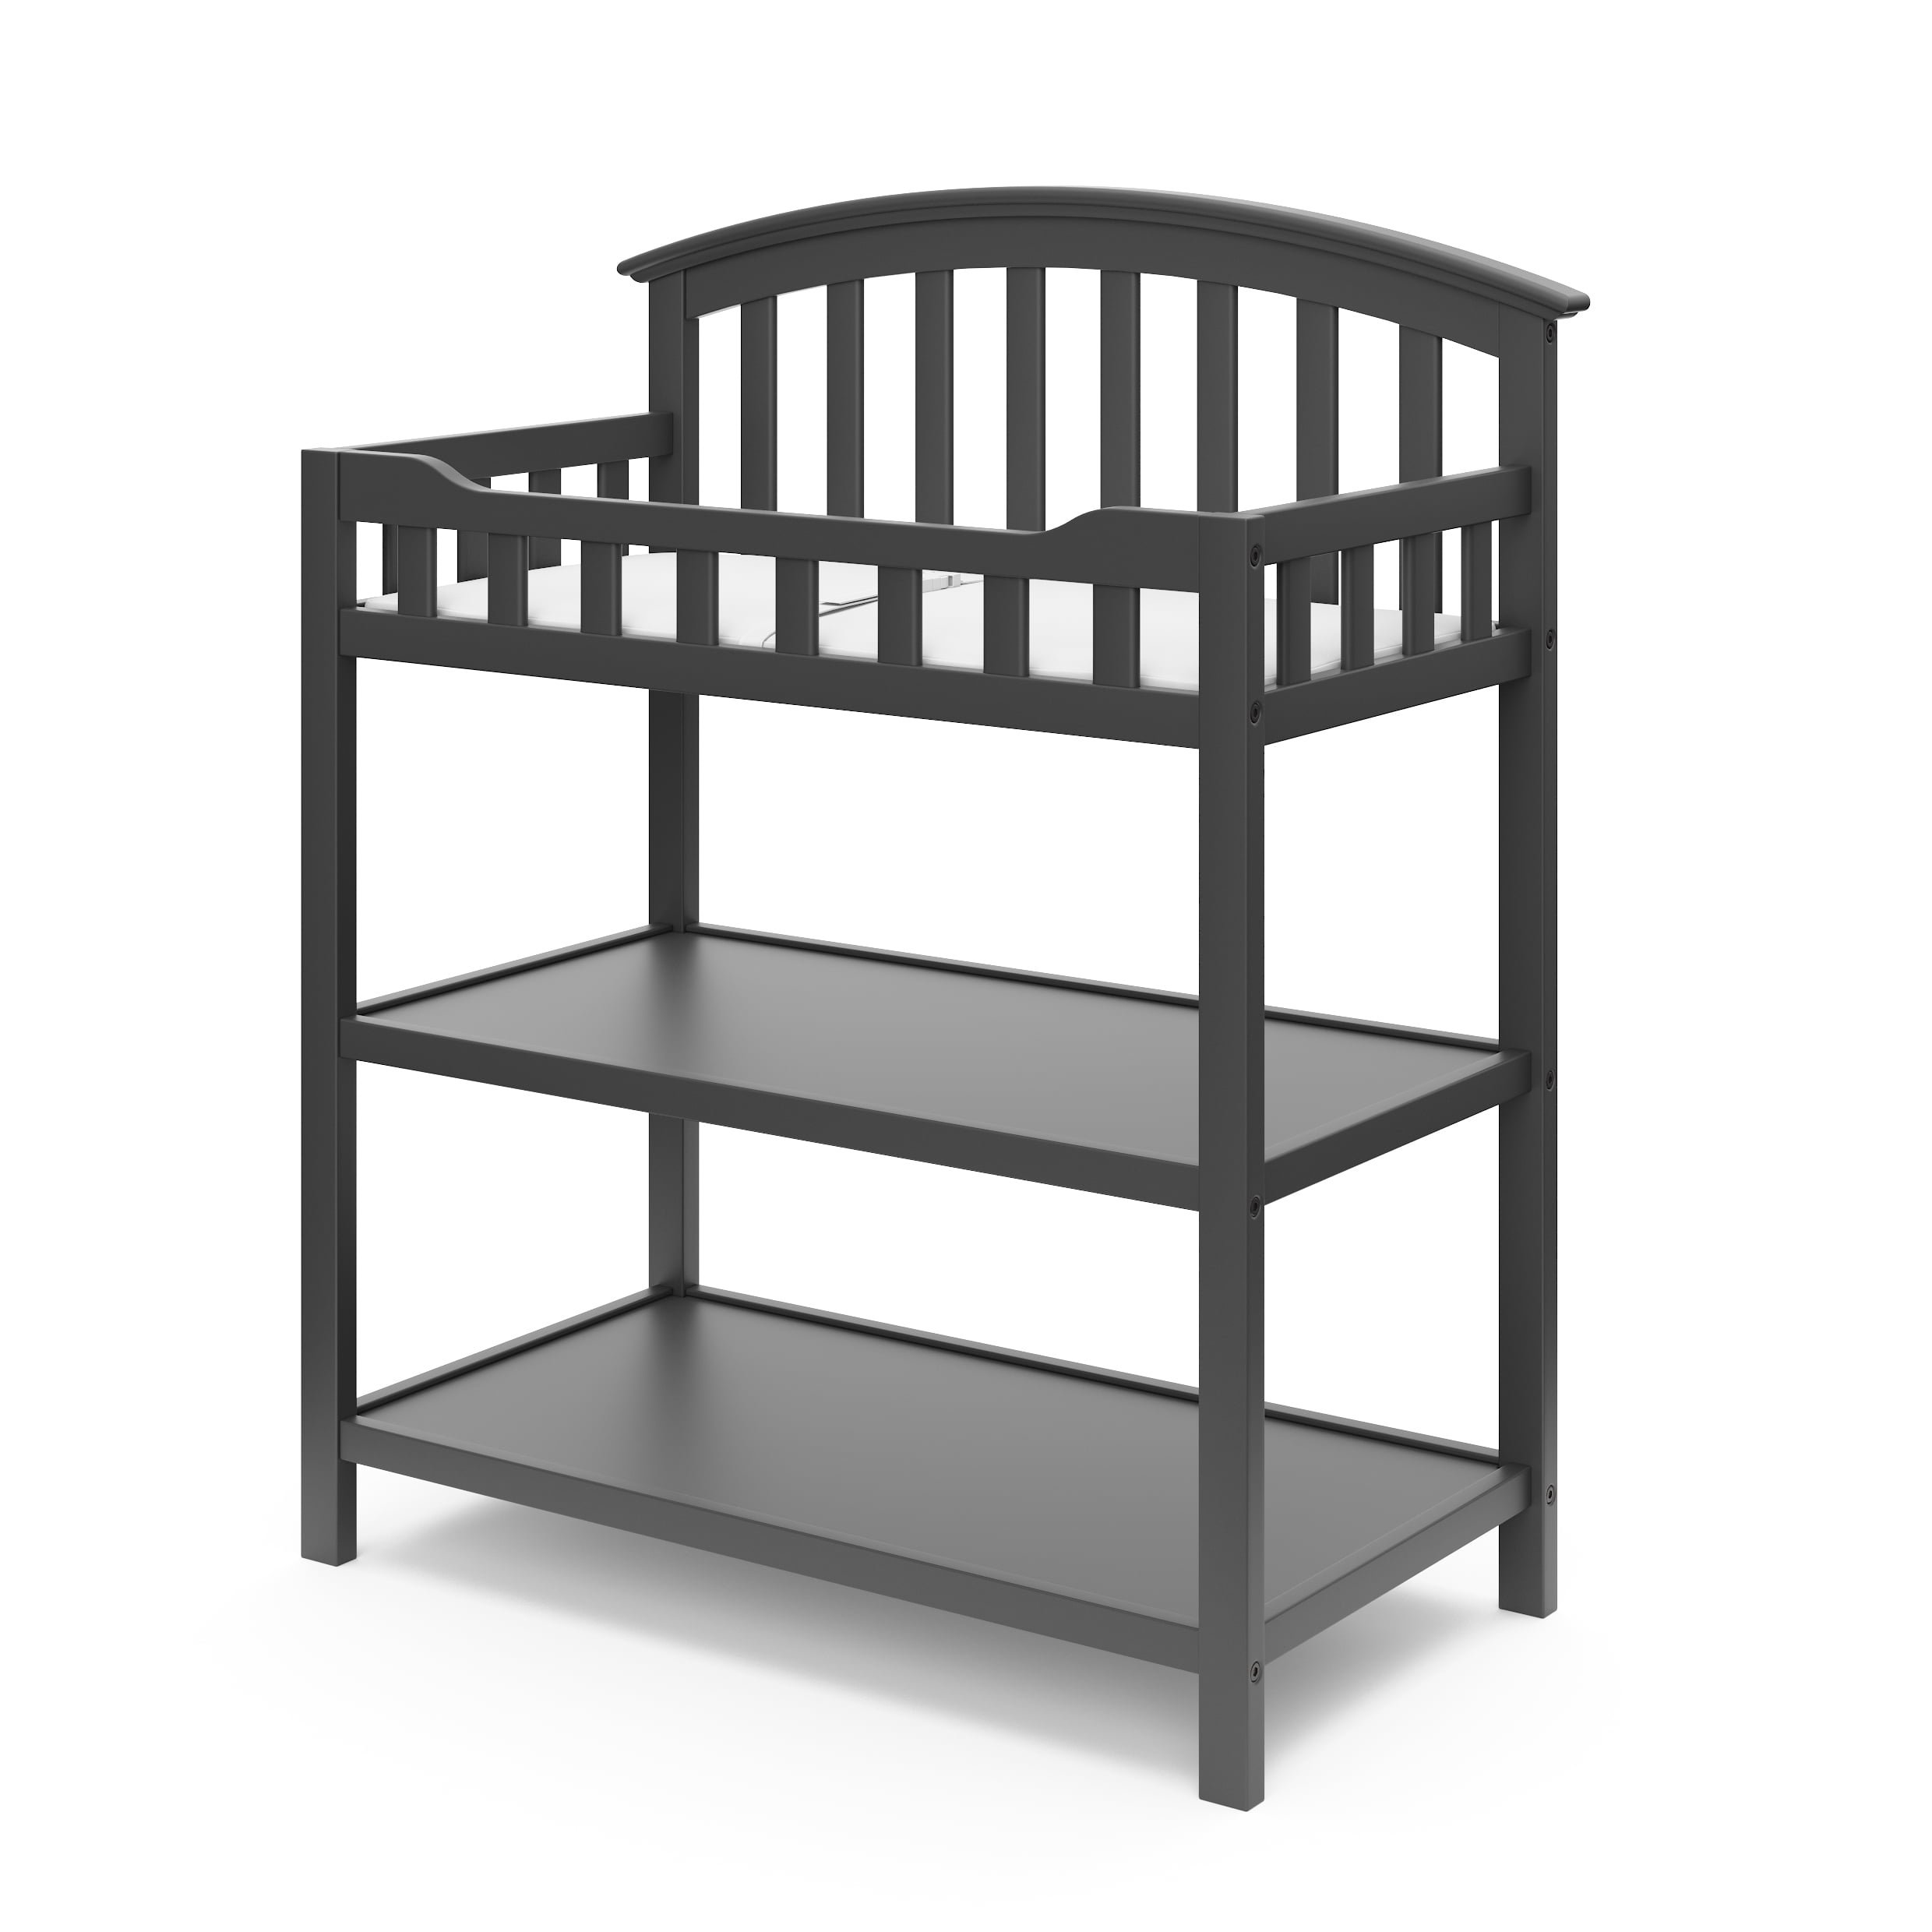 graco changing table